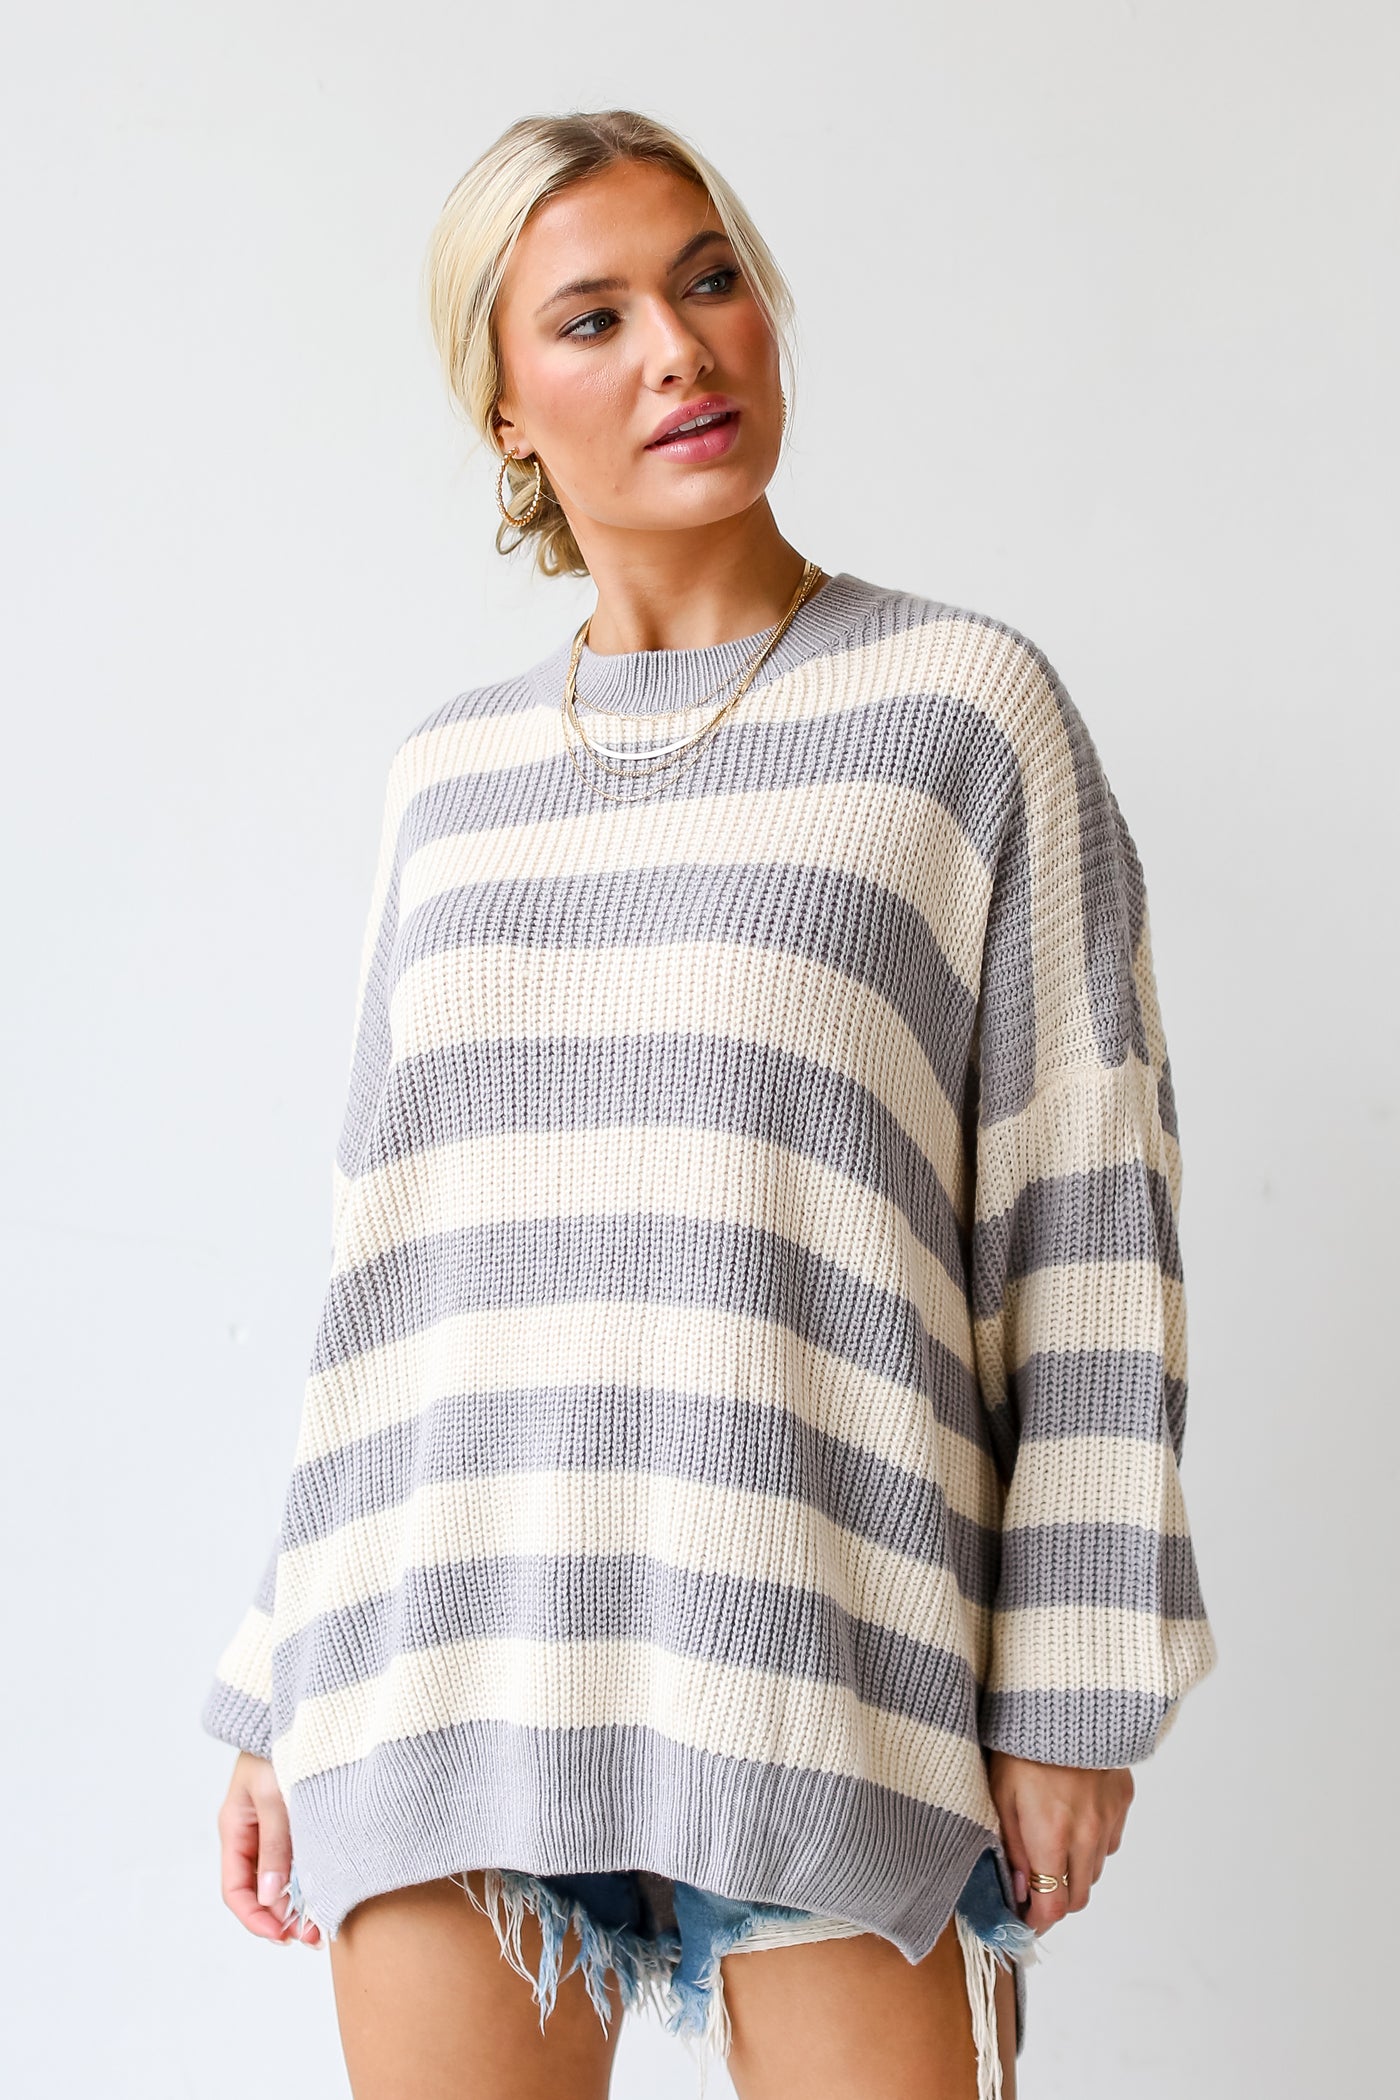 grey Striped Sweater untucked